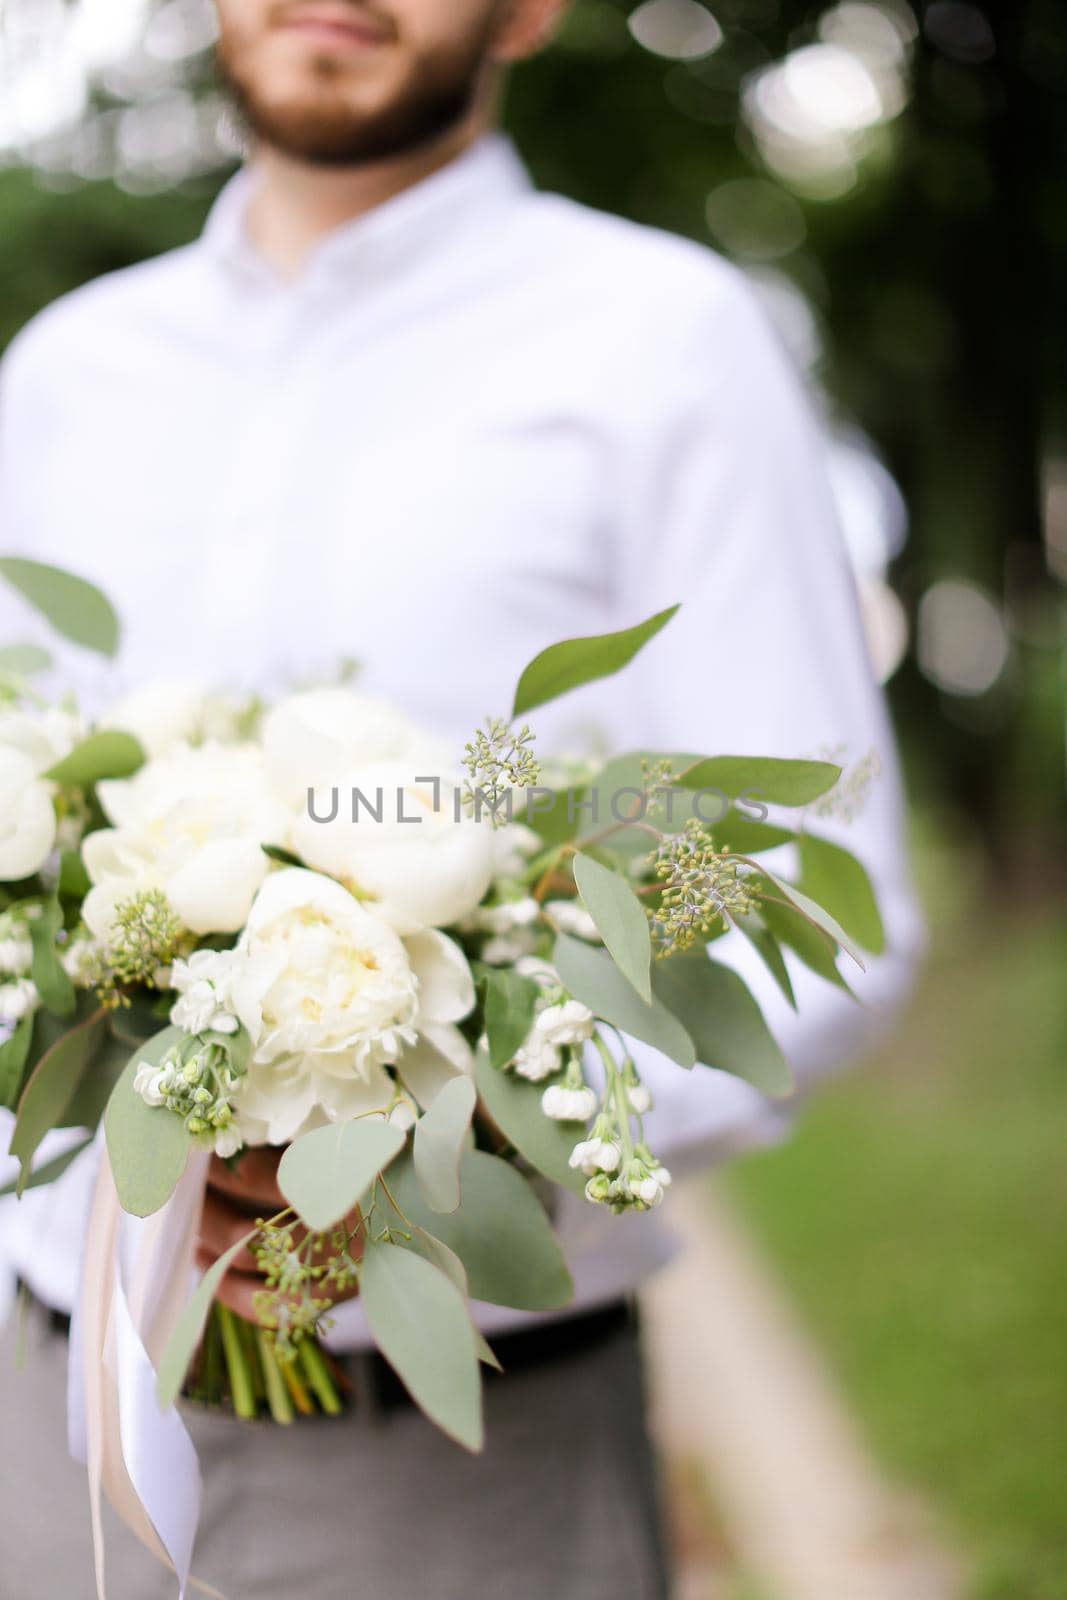 Caucasian groom wearing grey trousers and white shirt waiting for bride with bouquet, focus on flowers. Concept of wedding photo session and floristic art.